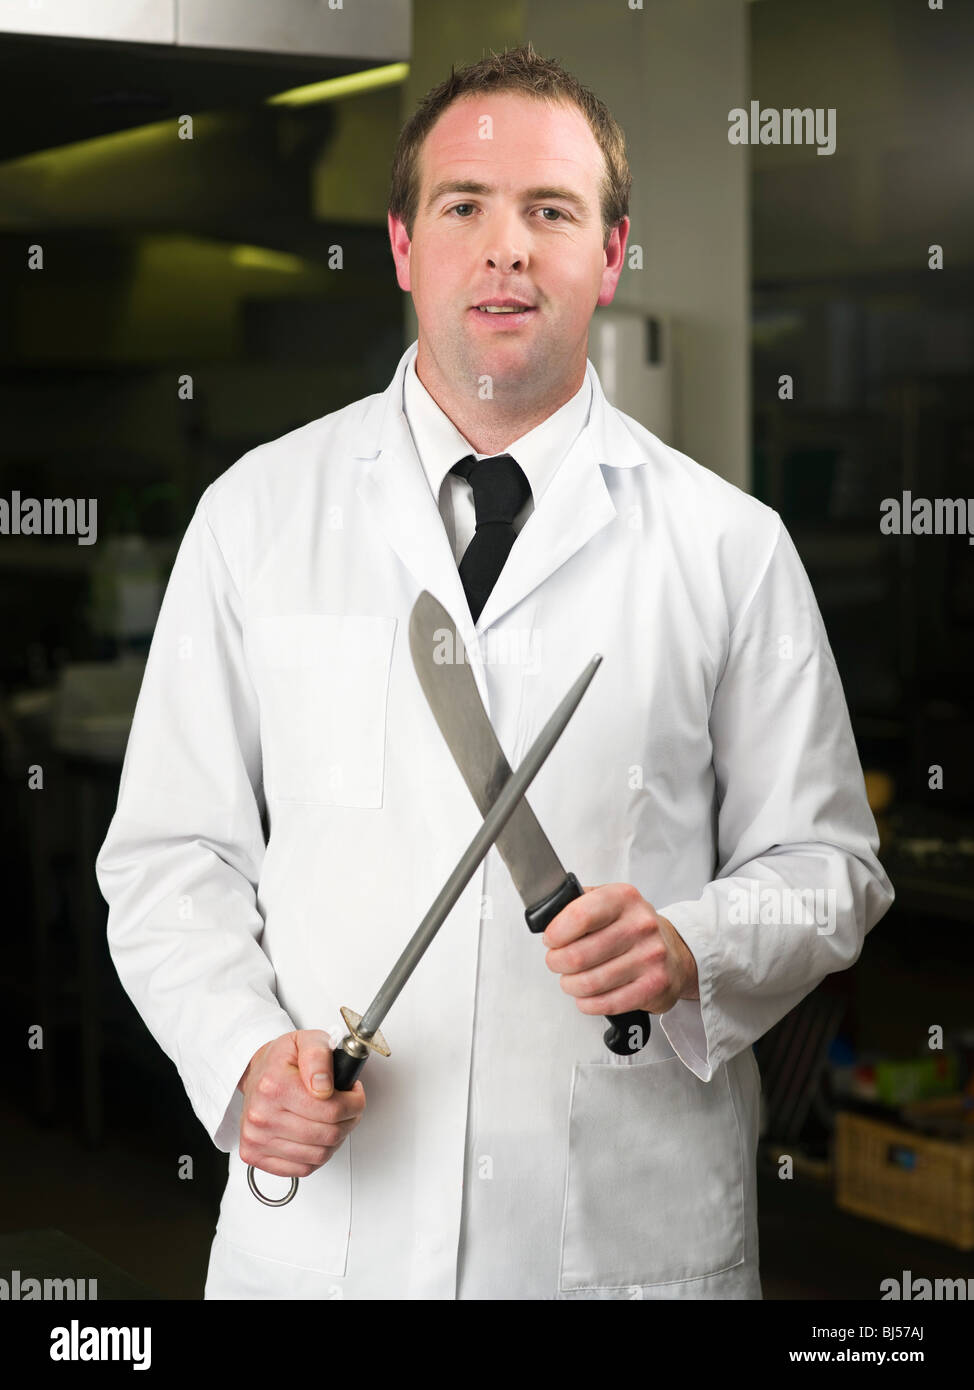 A butcher sharpening his knife Stock Photo